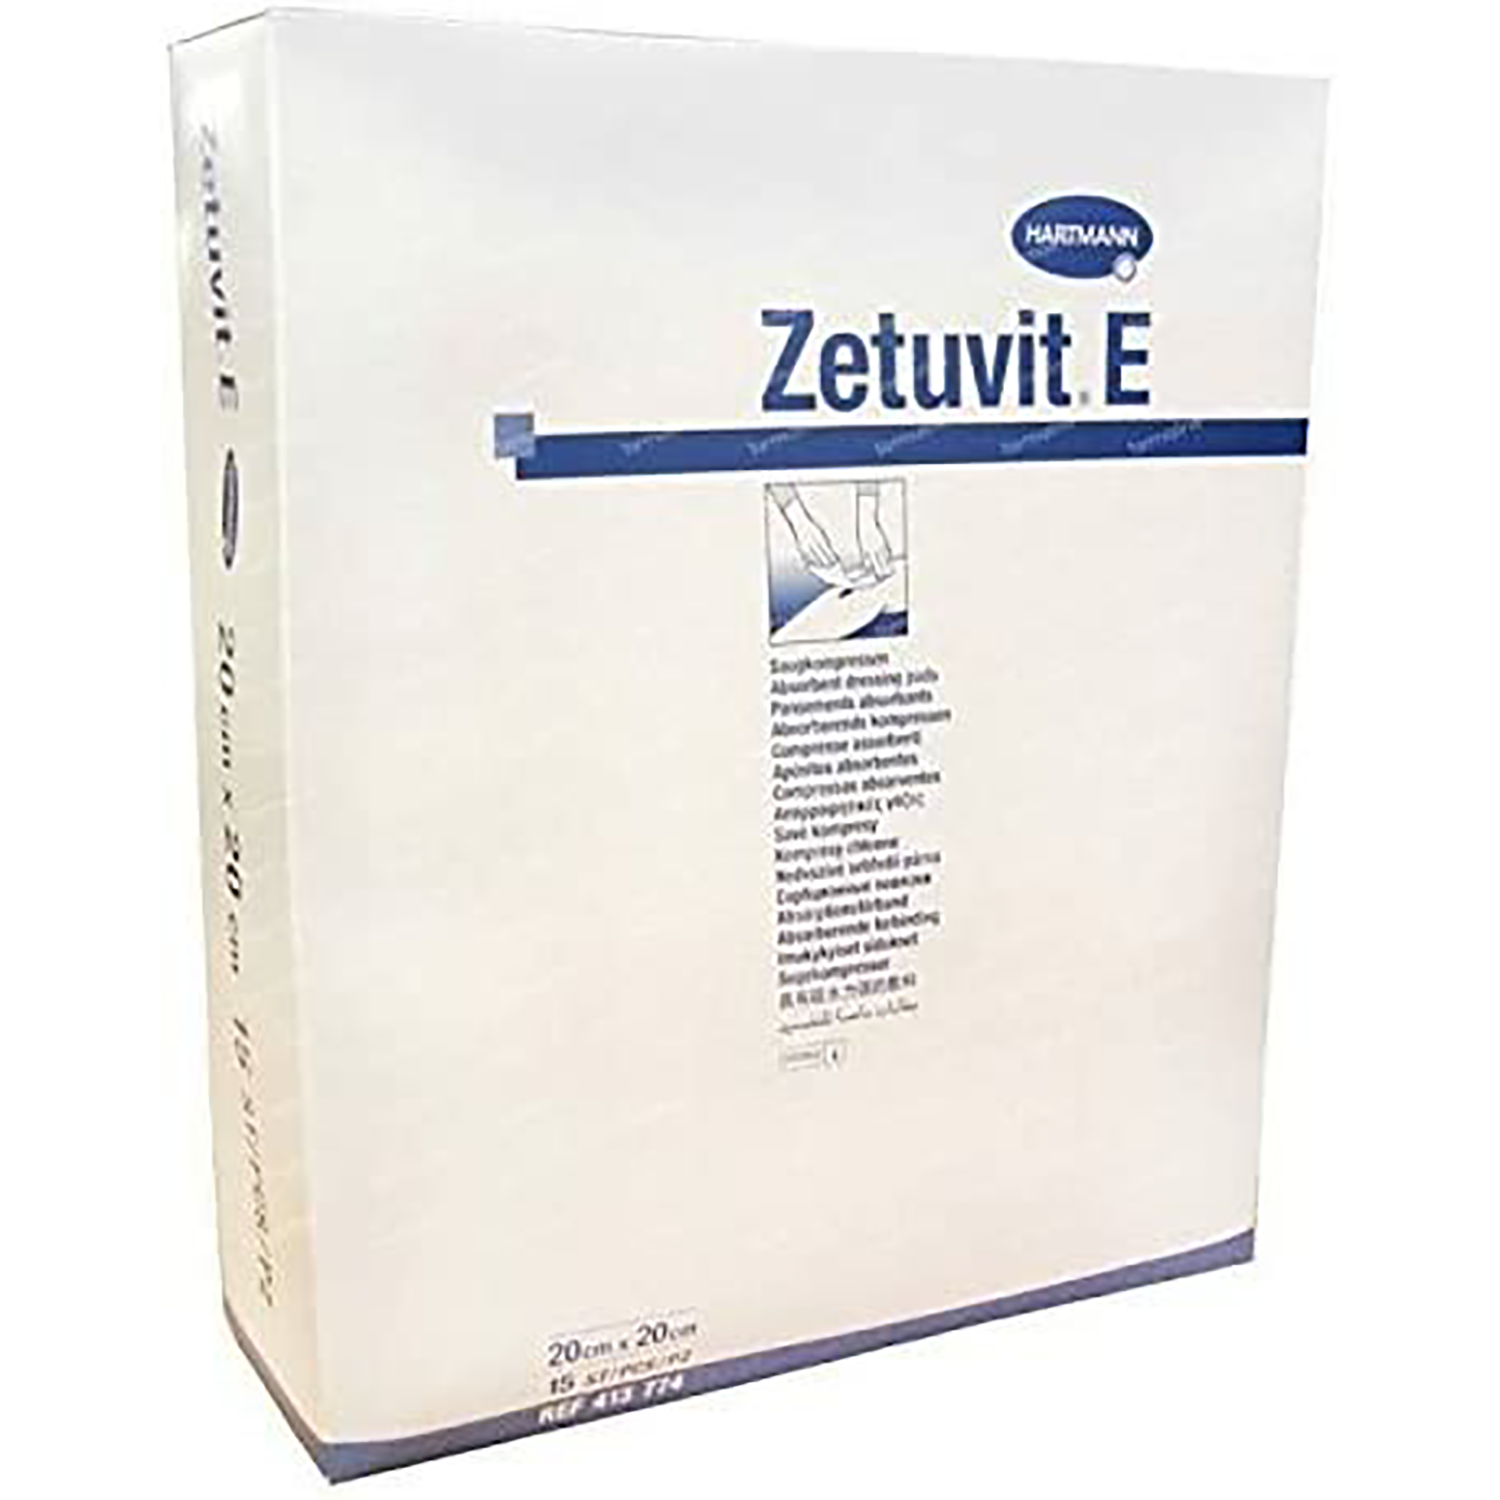 Zetuvit E Absorbent Dressing Pads | 20 x 20cm | Pack of 15